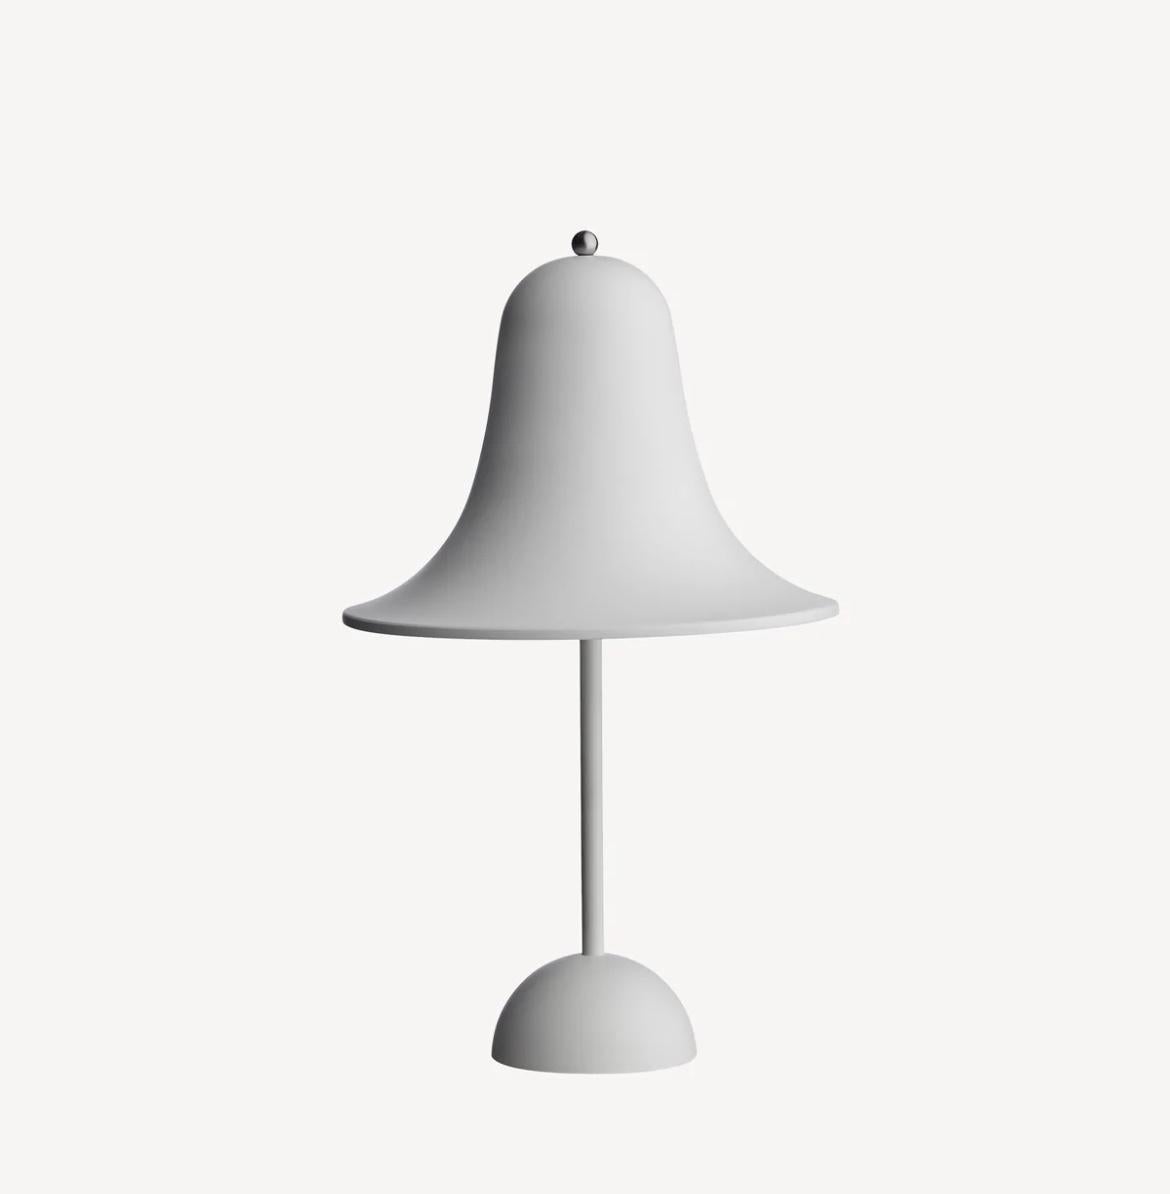 Verner Panton 'Pantop Portable' table lamp in 'Matt White' for Verpan. Designed in 1980. New, current production.

This is a versatile smaller and wireless version of the 'Pantop' table lamp, usb-chargeable. 

The elegant Pantop line was